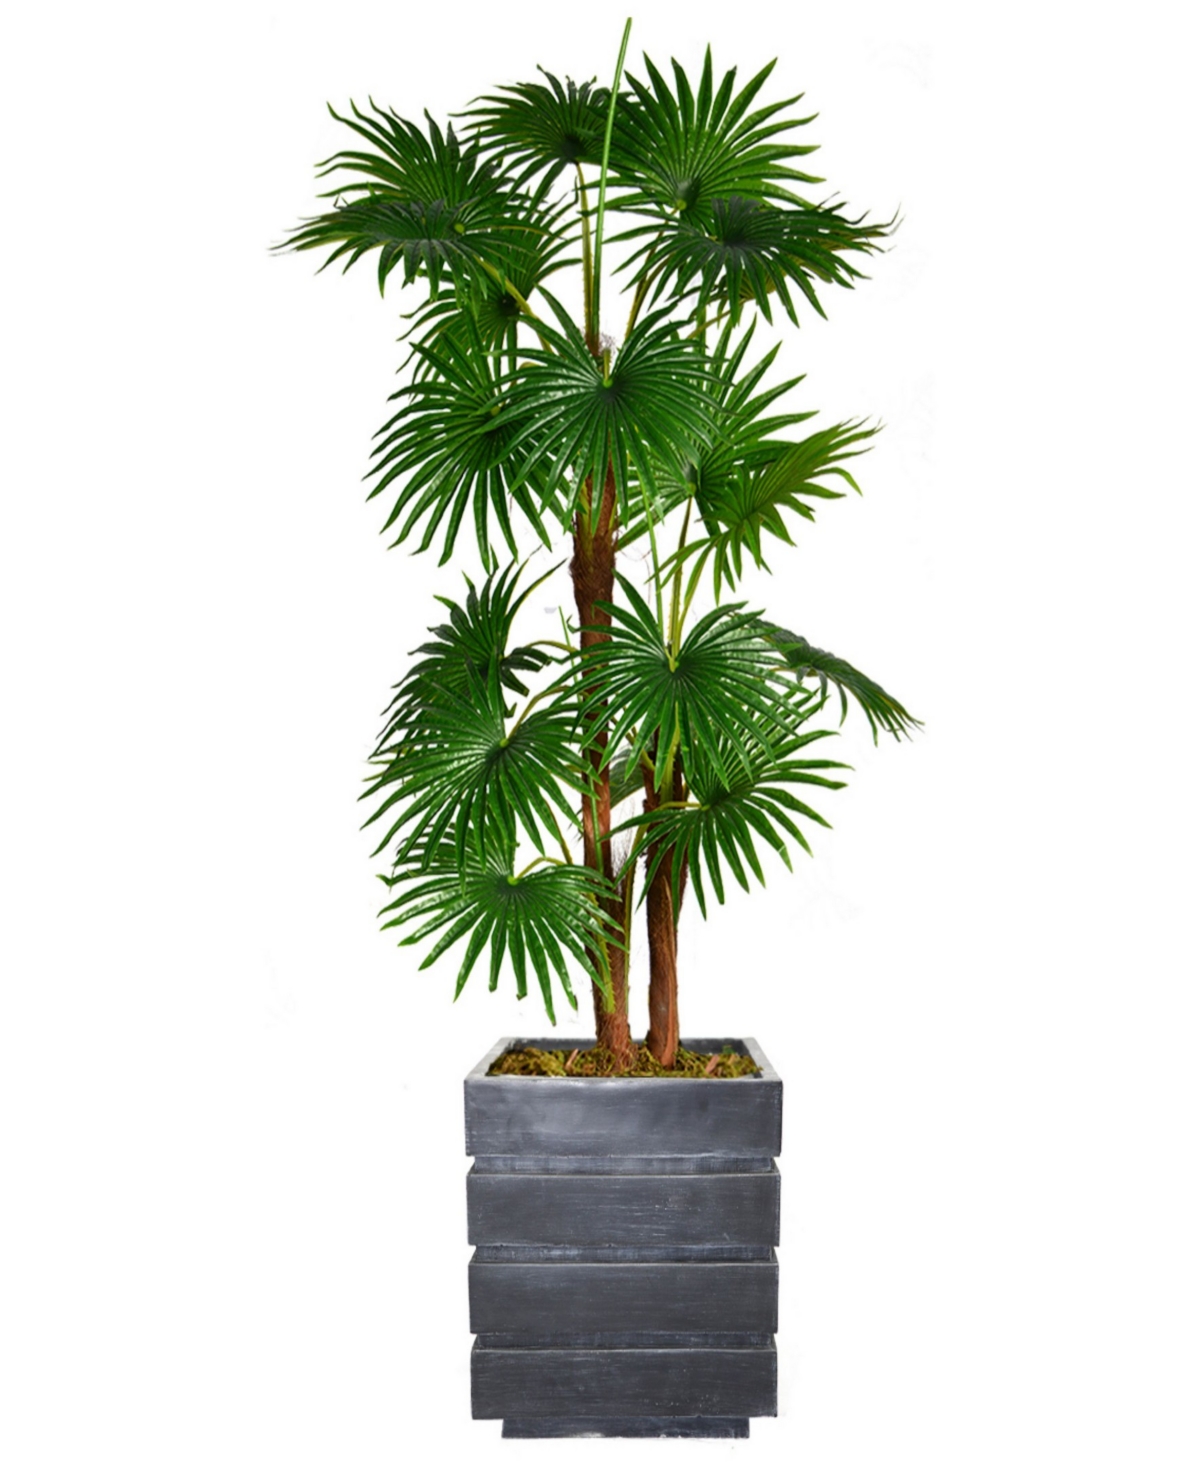 Artificial Faux Real Touch 54" Tall Fan Palm Tree With Burlap Kit And Fiberstone Planter - Assorted